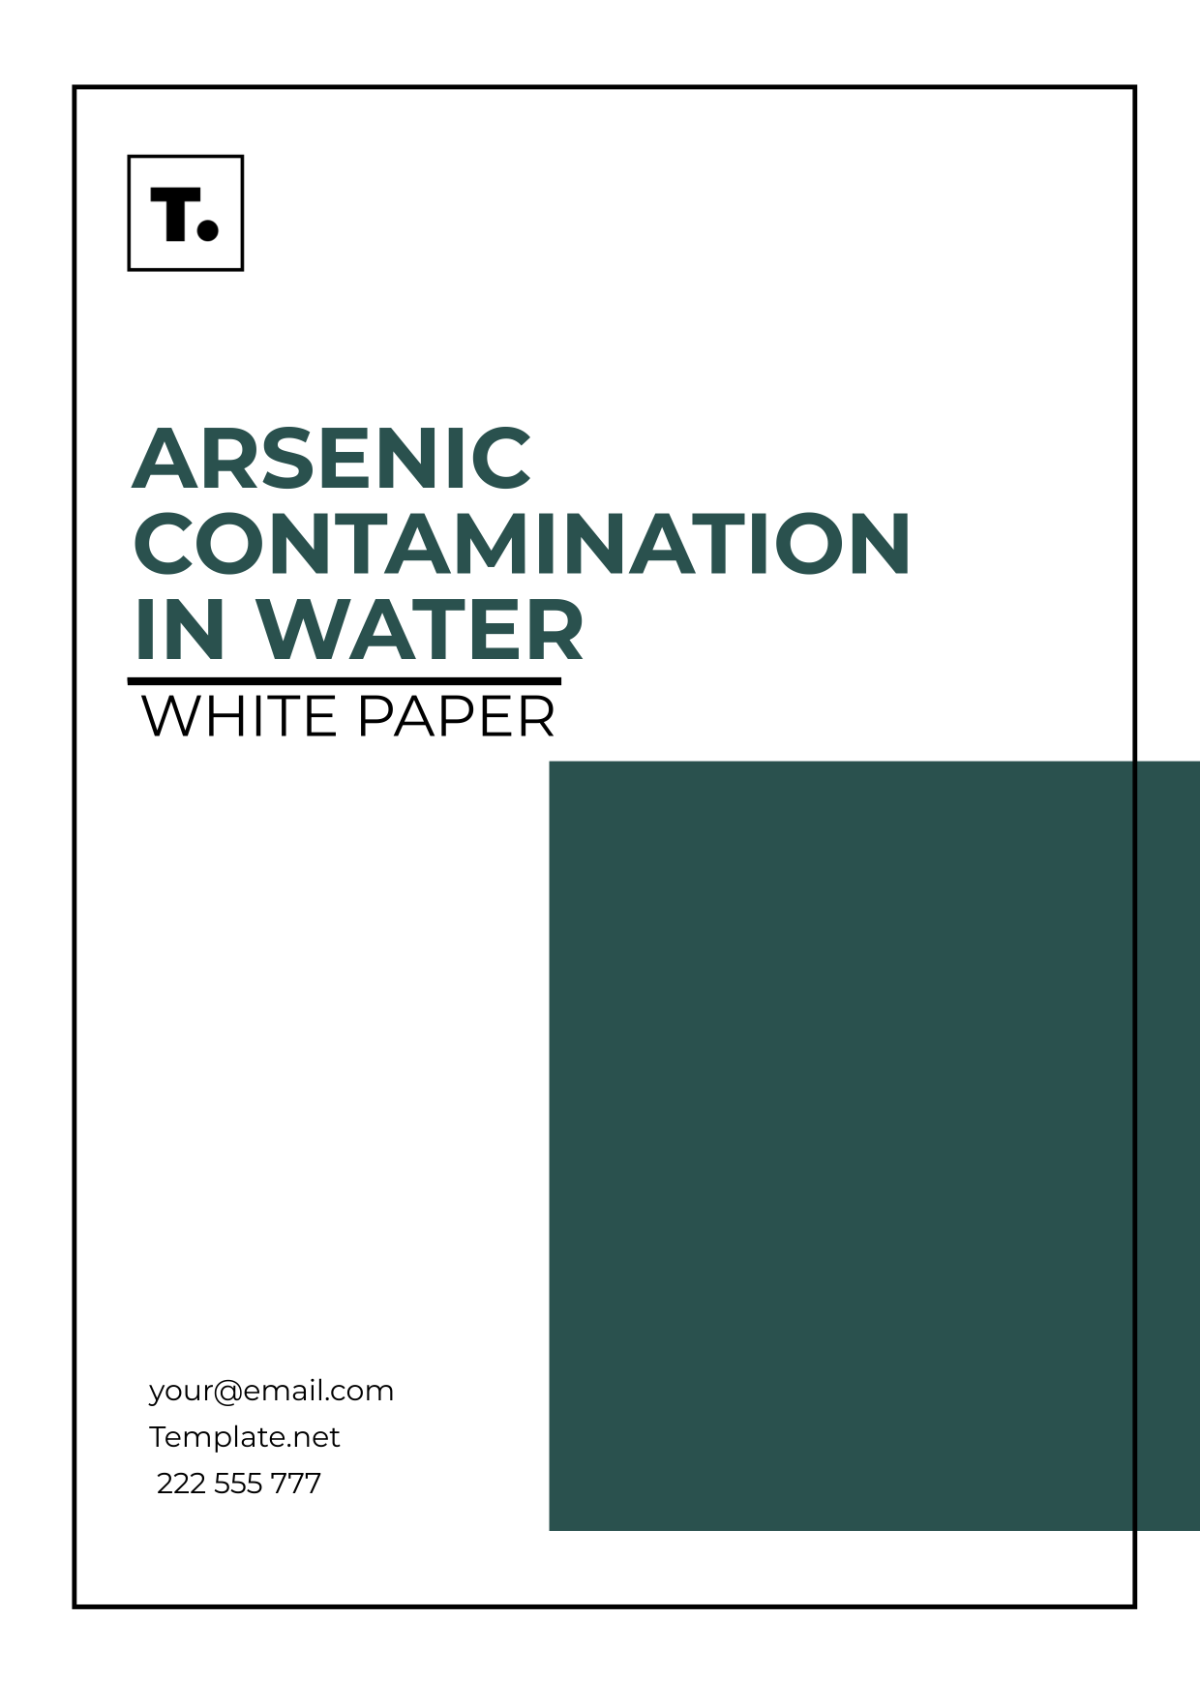 Free Arsenic Contamination In Water White Paper Template